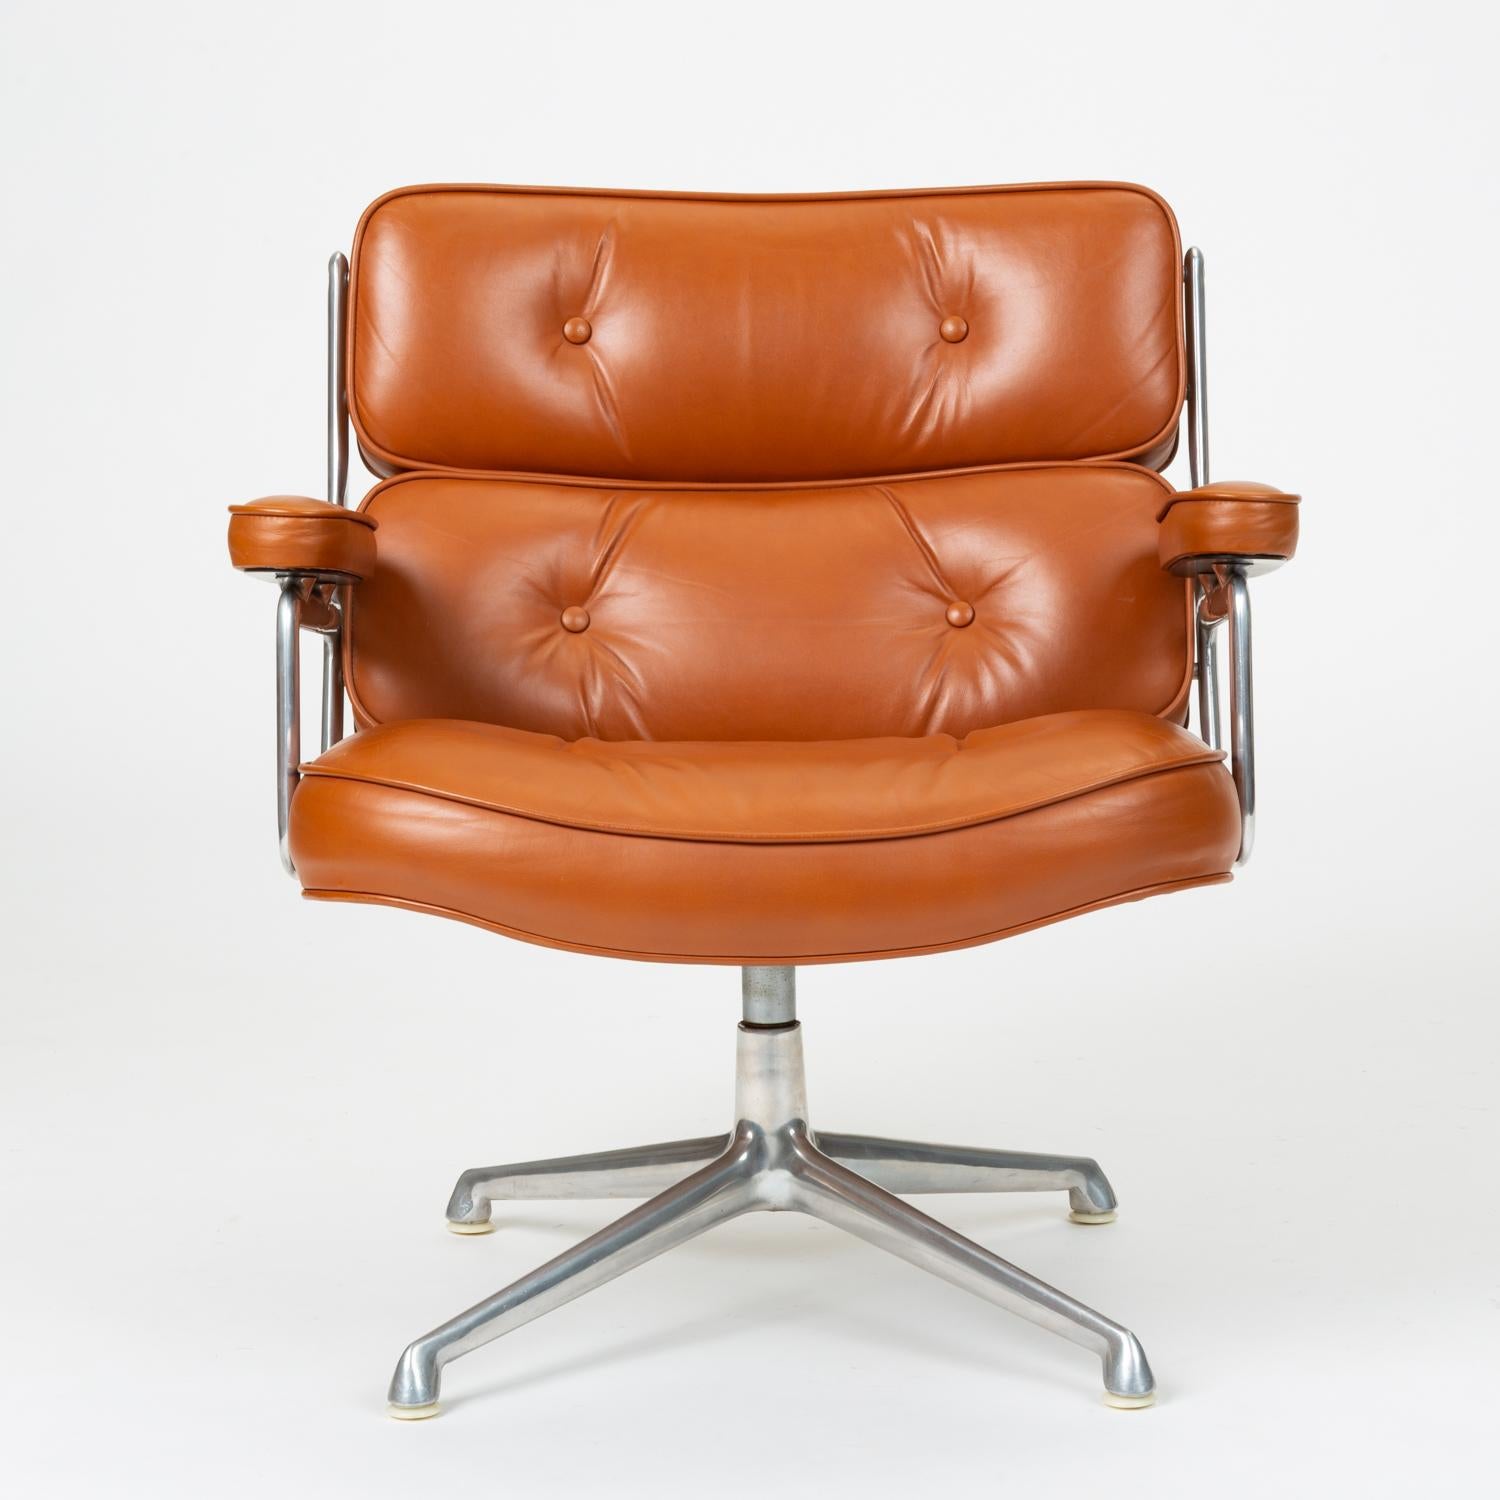 A legendary office design by Ray and Charles Eames for the three modernist lobbies of the new Time Life Building in Manhattan, the Time Life lobby chair has a polished aluminum frame and segmented, tufted cushions in leather upholstery. Leather